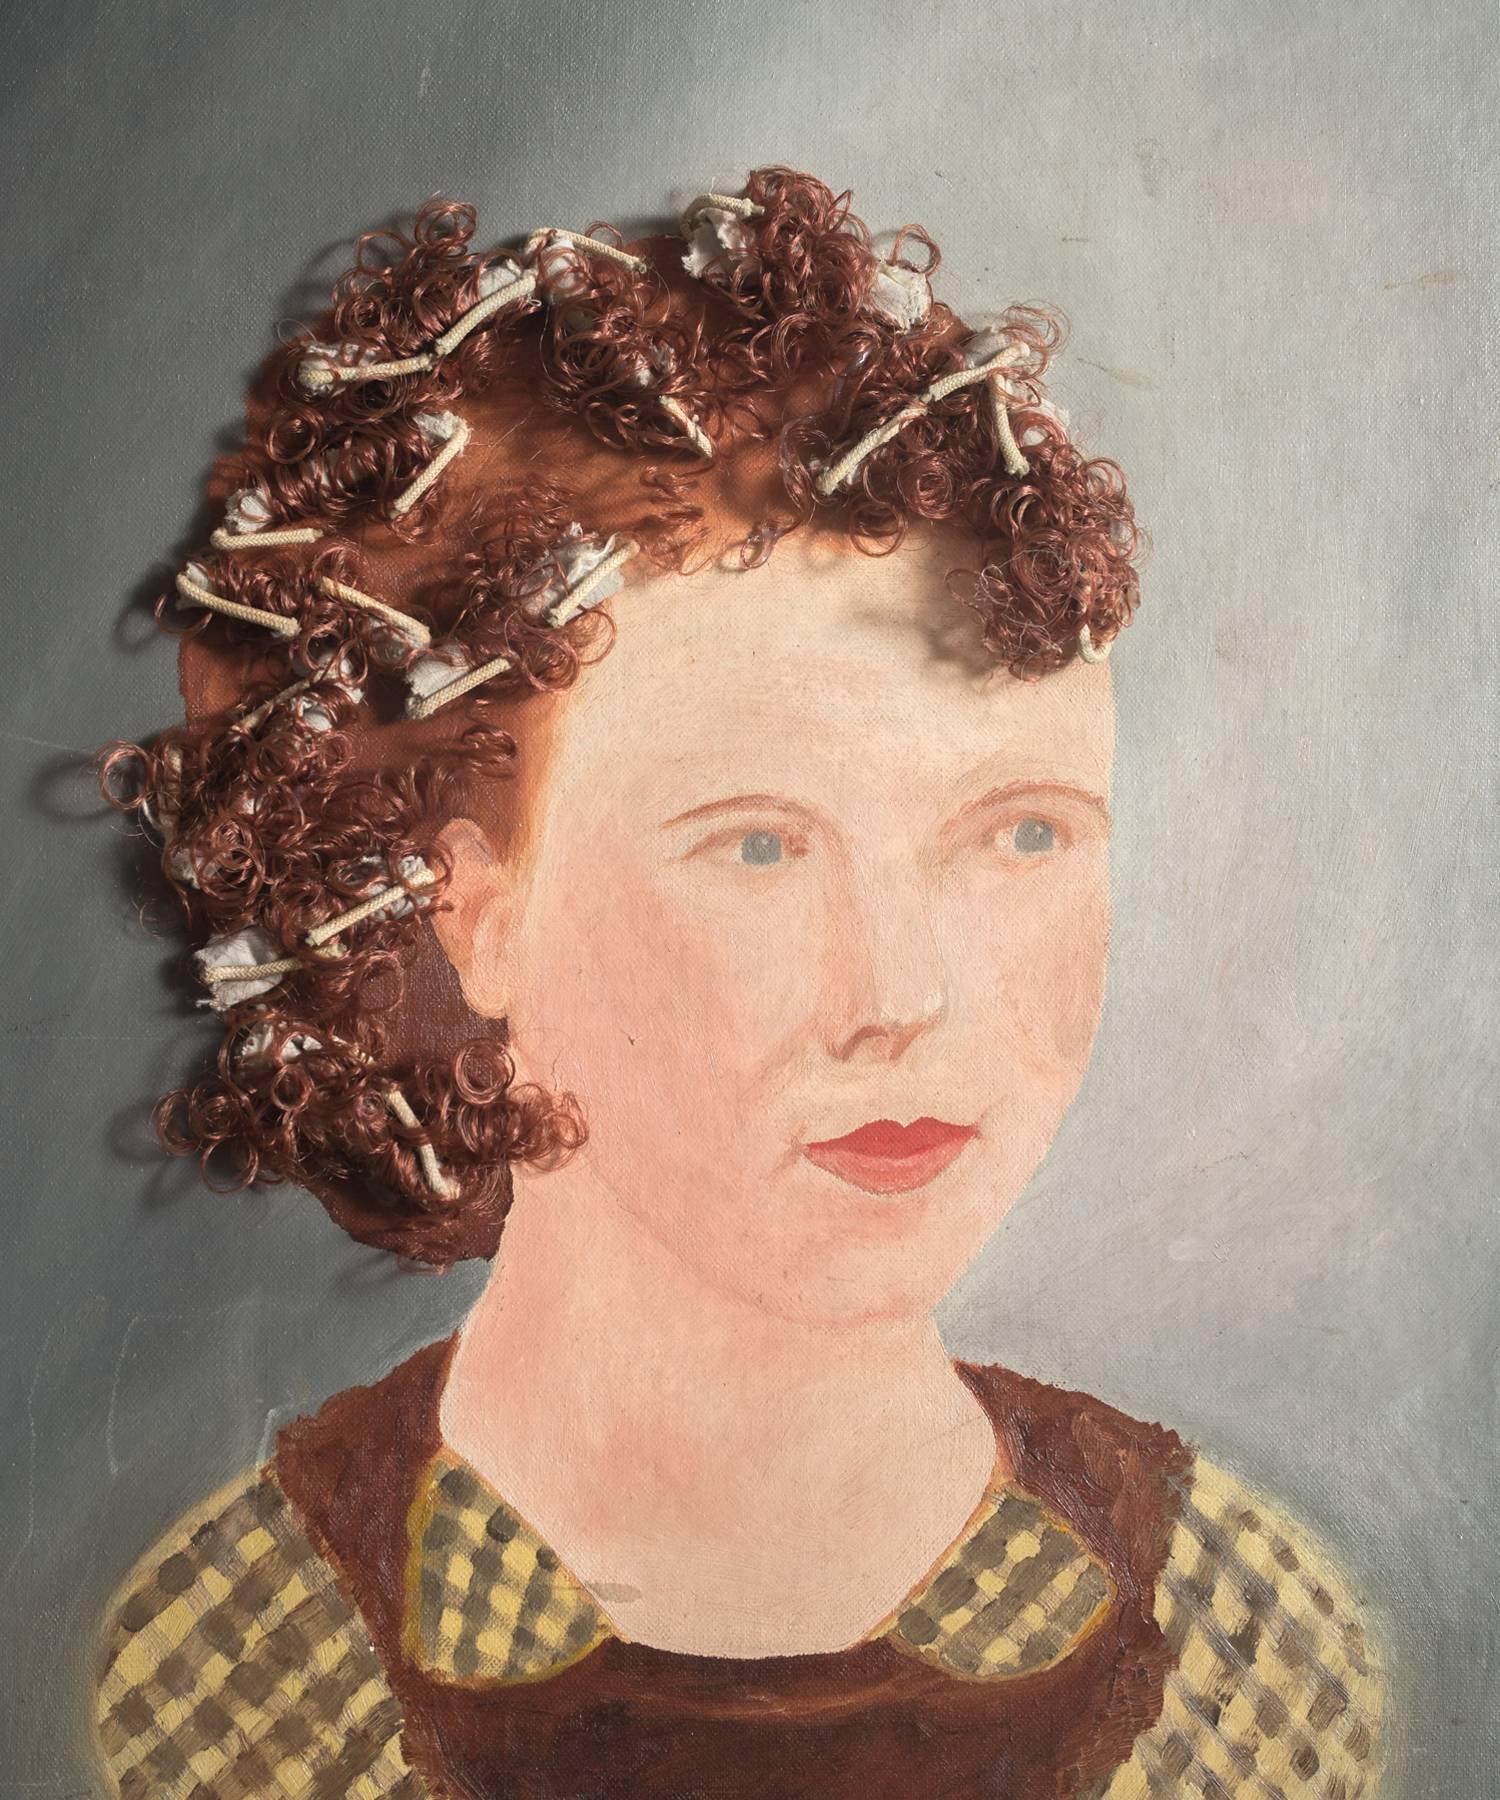 Painting of a woman with Curlers, circa 1950.

Painting on canvas board panel with applied locks of red hair and rollers.